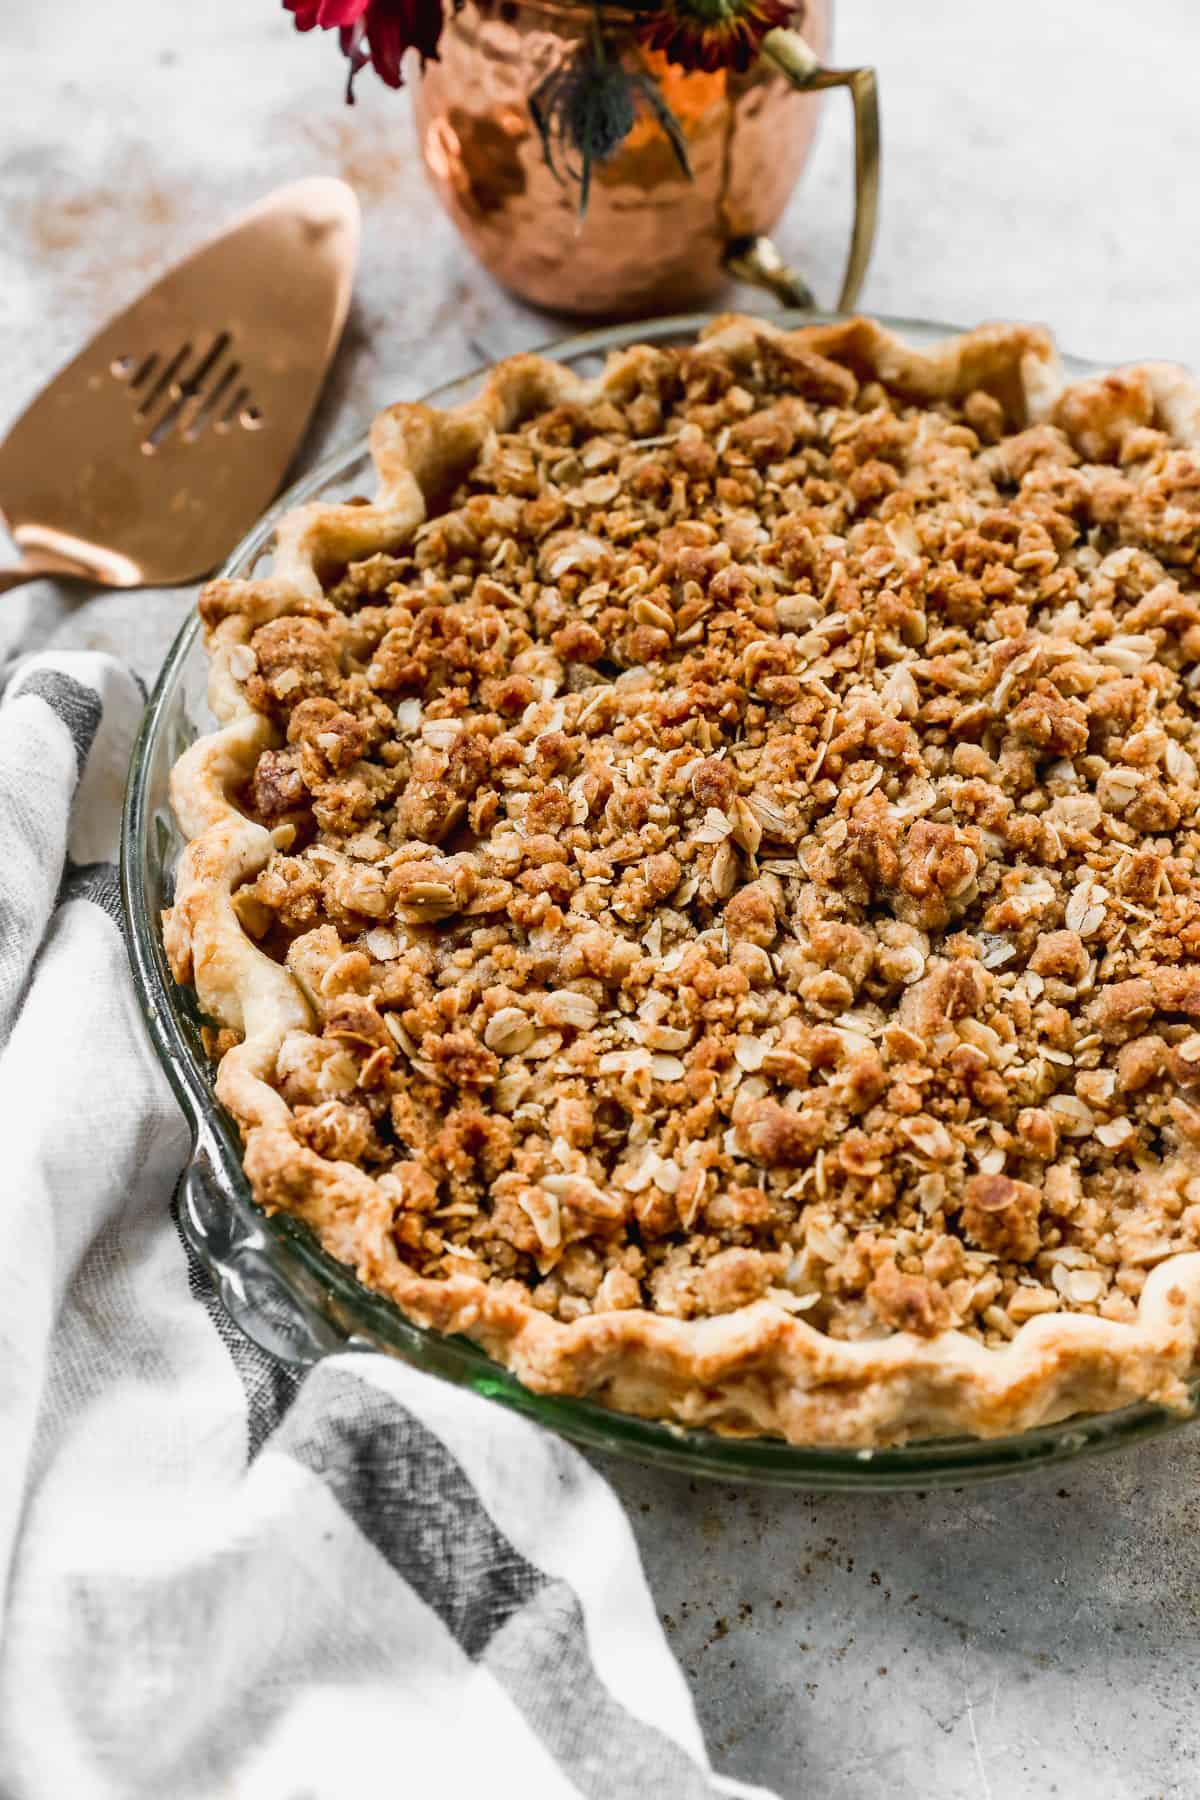 A homemade Pear Pie recipe with a golden streusel topping.